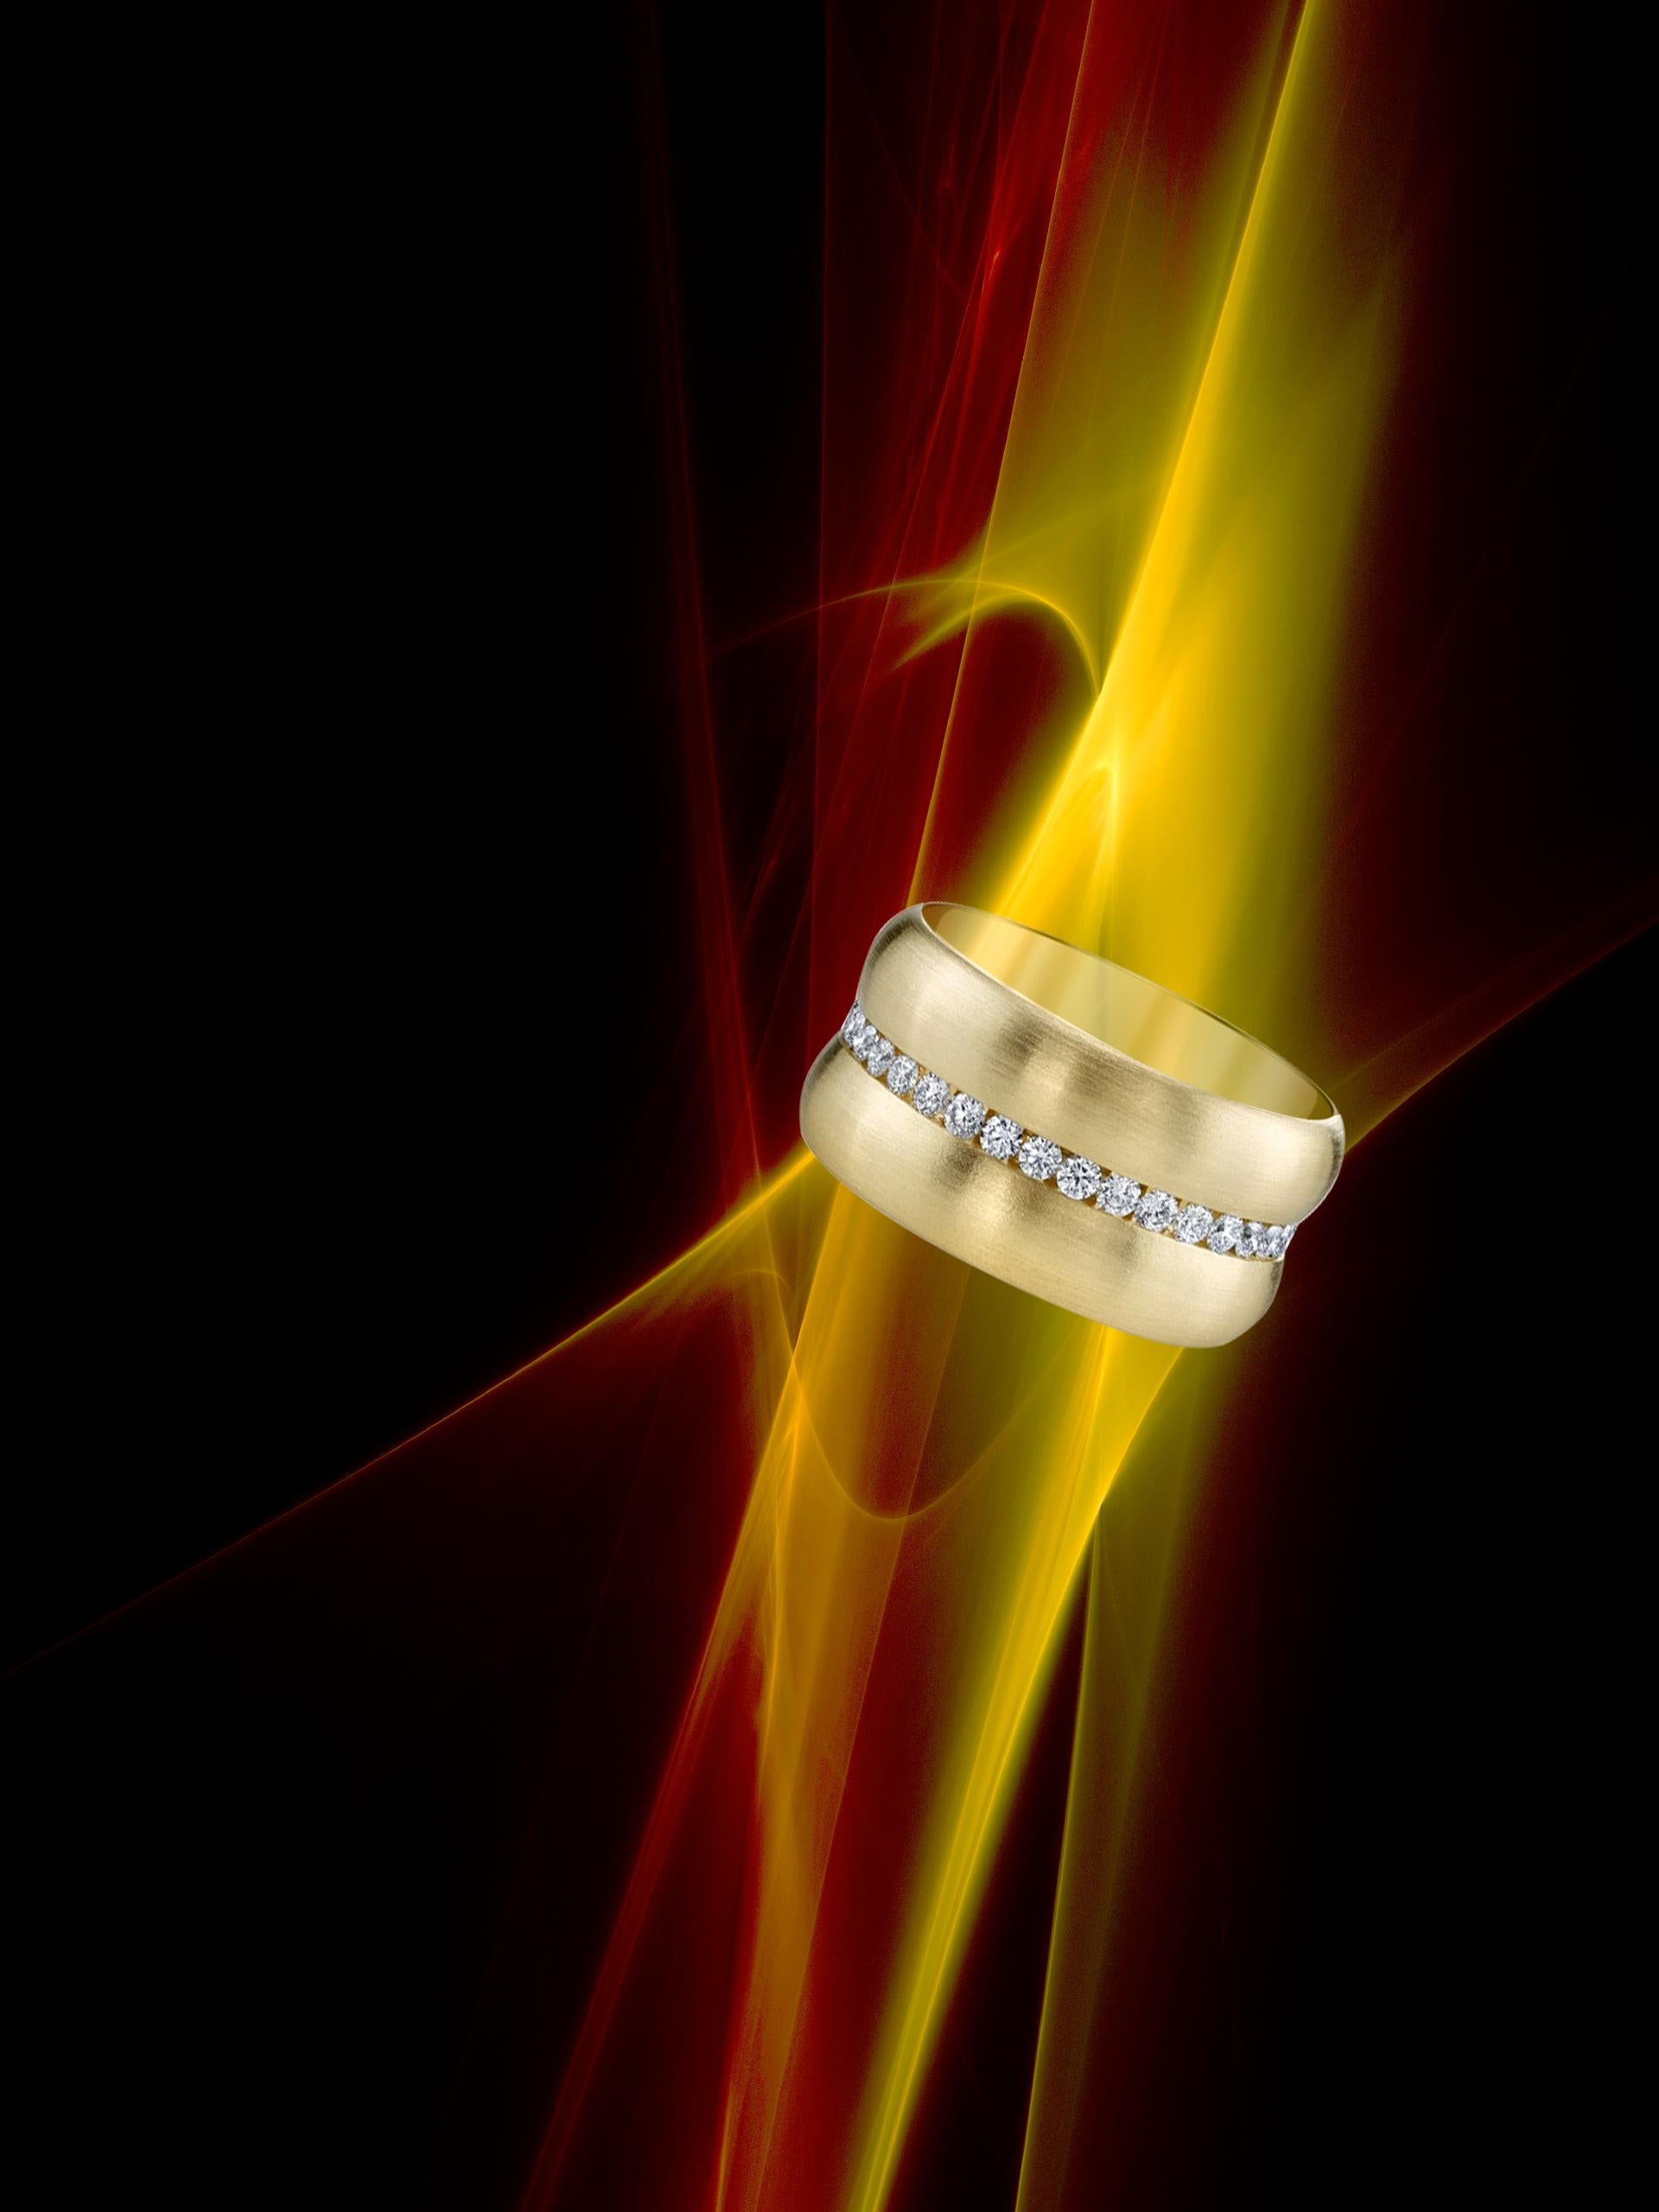 Introducing a stunning ring designed to appeal to the fashion-conscious woman who values both style and practicality. This ring is crafted from 18 Karat Yellow Gold and is accented with 0.80 CT of channel set diamonds.

The delicate band of yellow